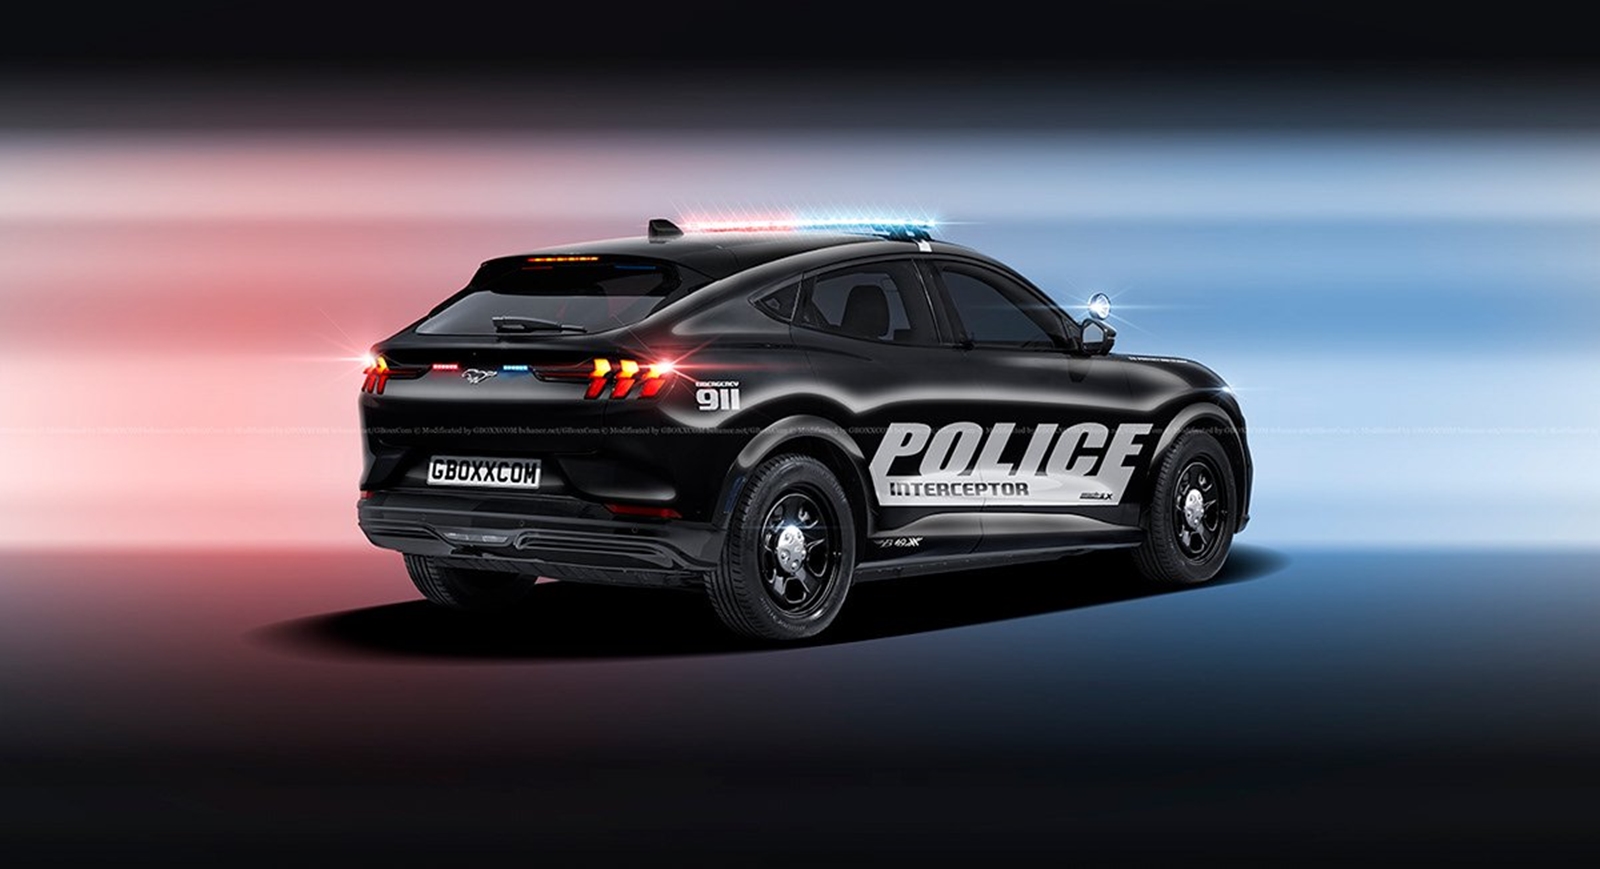 Ford Mustang Mach E Policia (1)